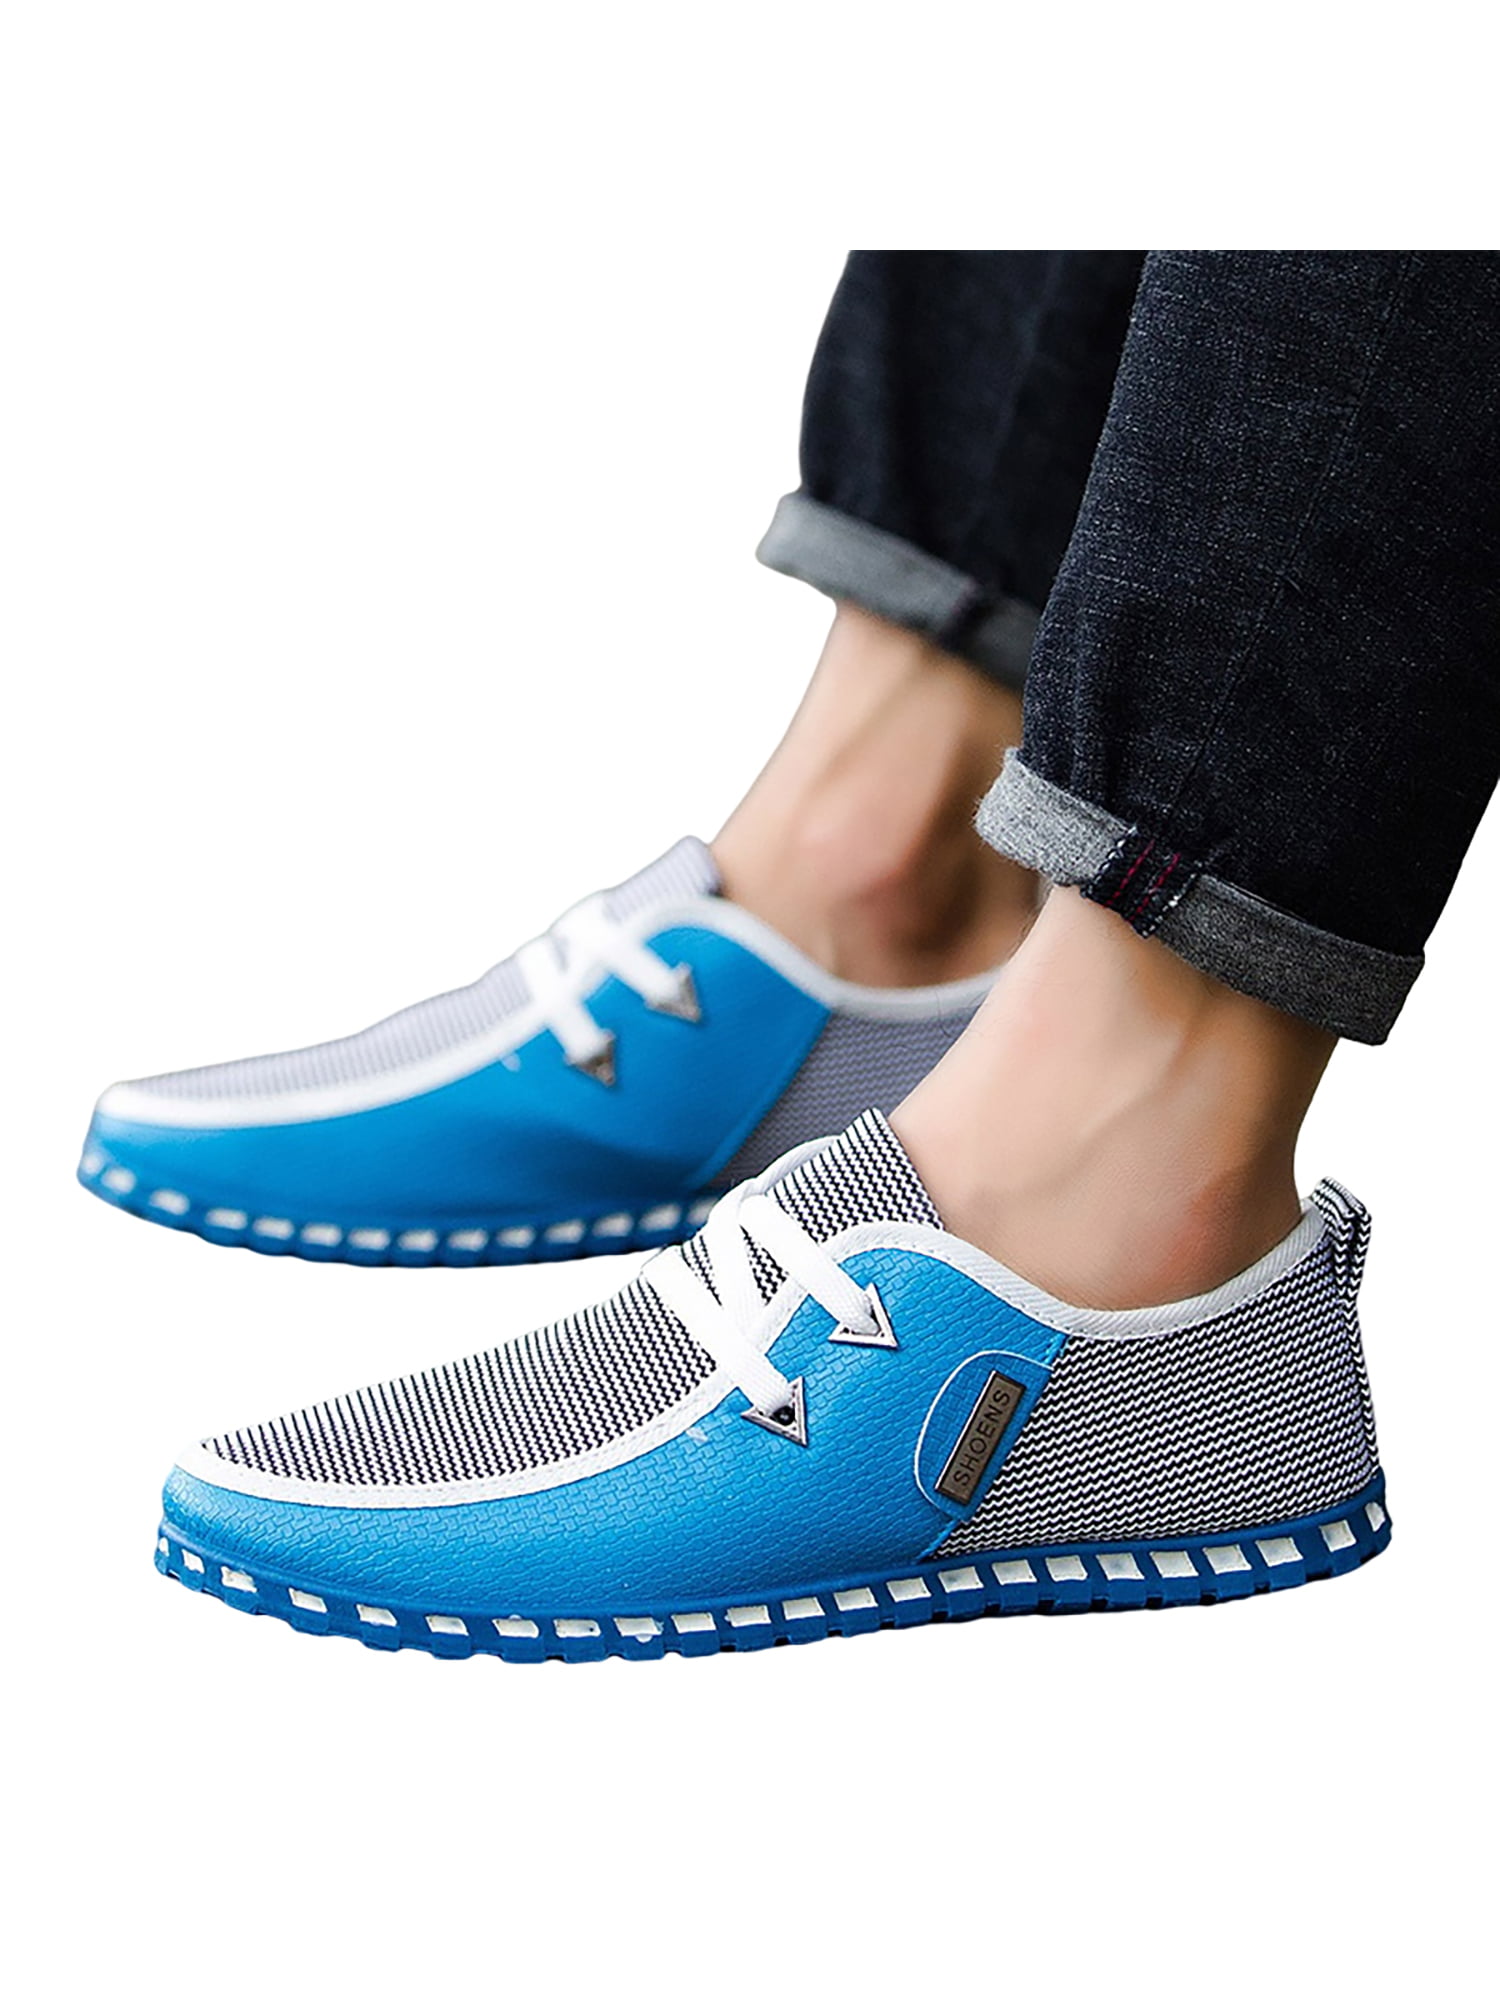 Big Size Brand Men Casual Shoes Fashion Breathable Shoes for Men Cheap Flat Shoes Men Slip On Loafers Shoes Men Sneakers